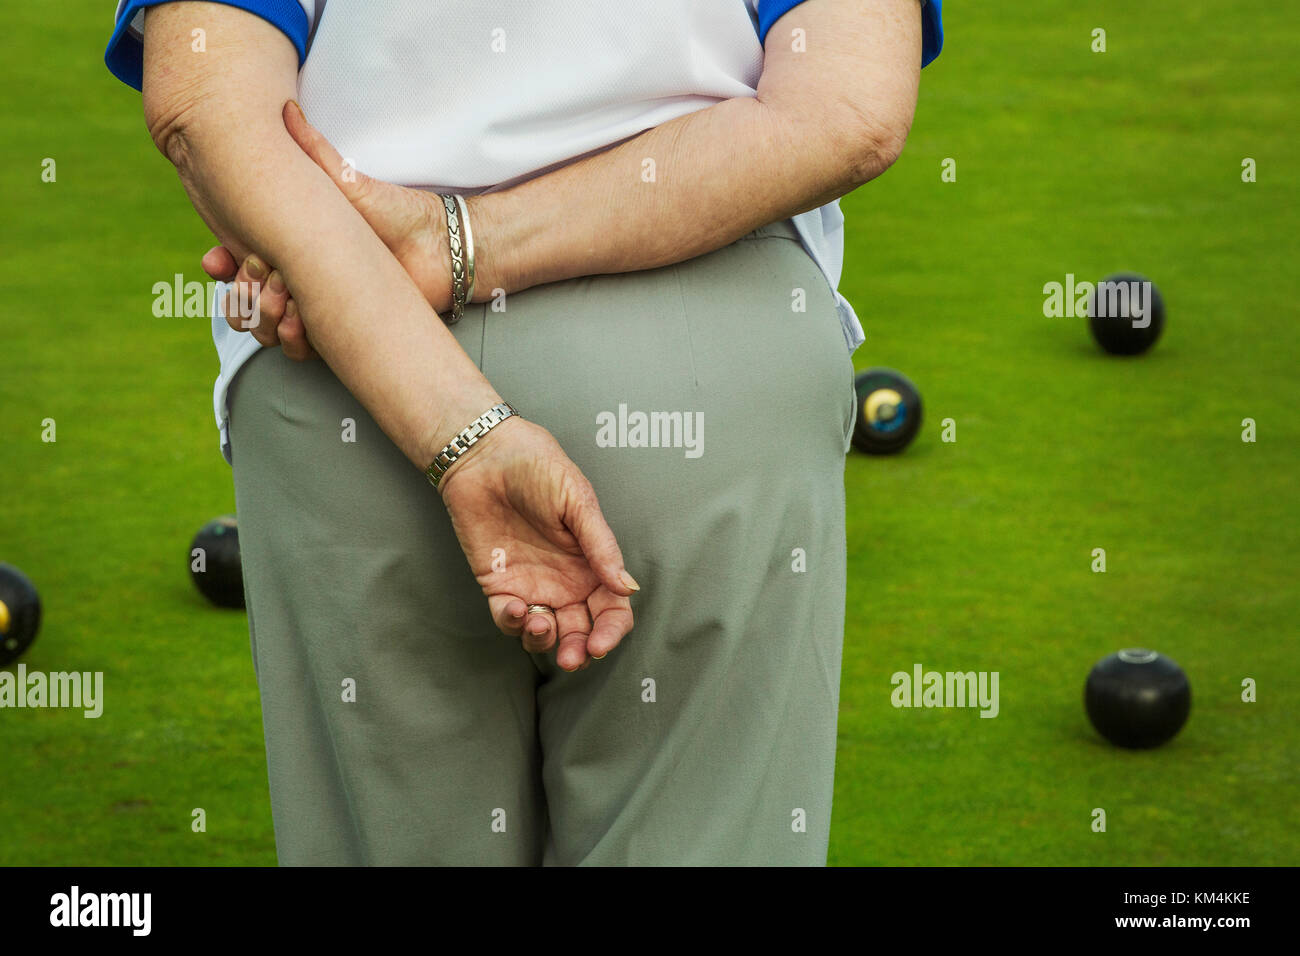 Rear view of a woman lawn bowls player with hands behind her back, and lawn bowls ranged across the playing surface. Stock Photo